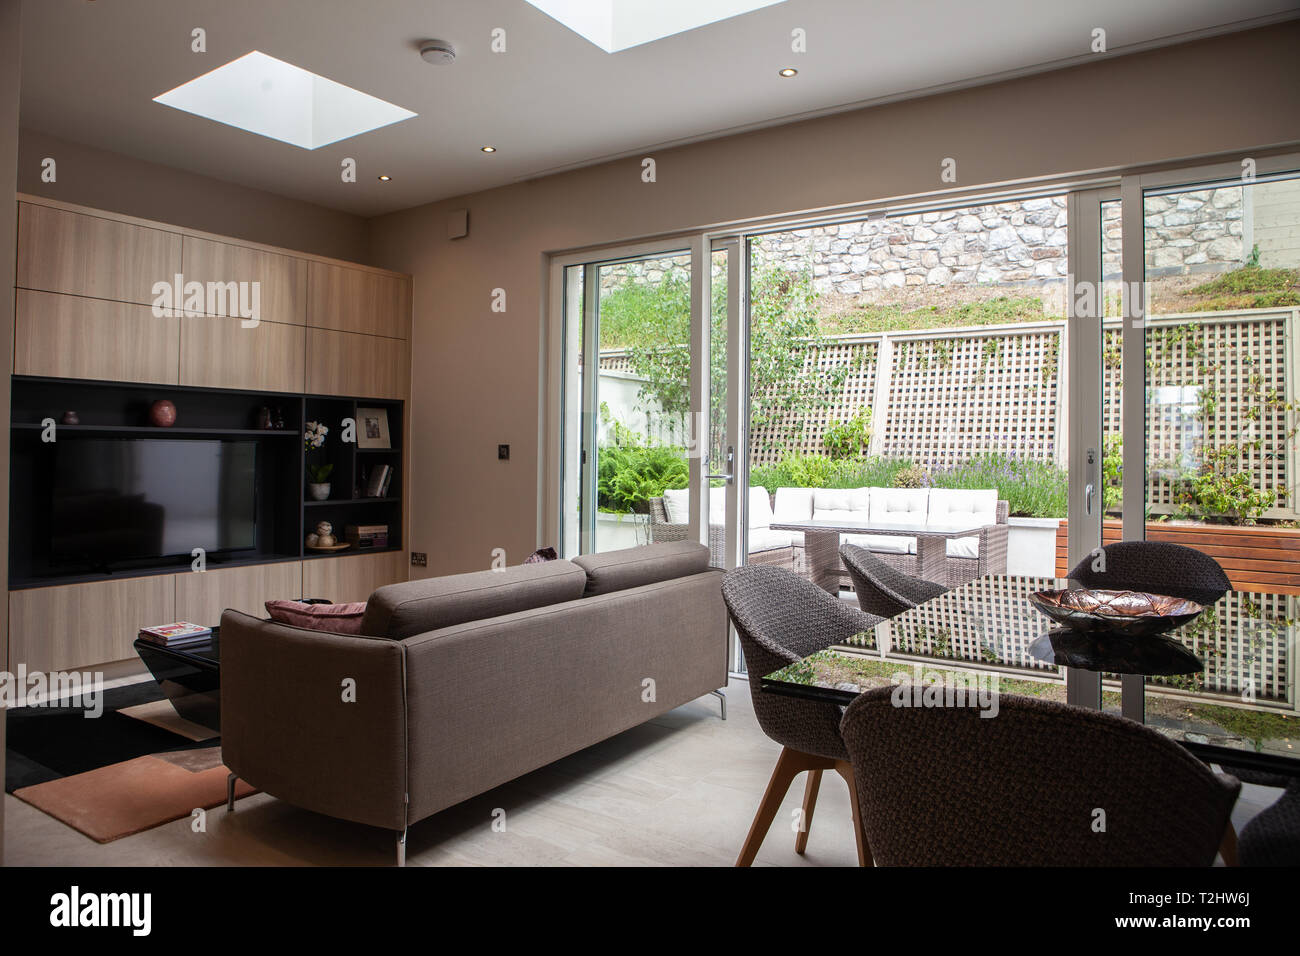 A modern family room and living space in the rear of a house featuring a couch, large TV and dining table area with patio doors and back garden. Stock Photo